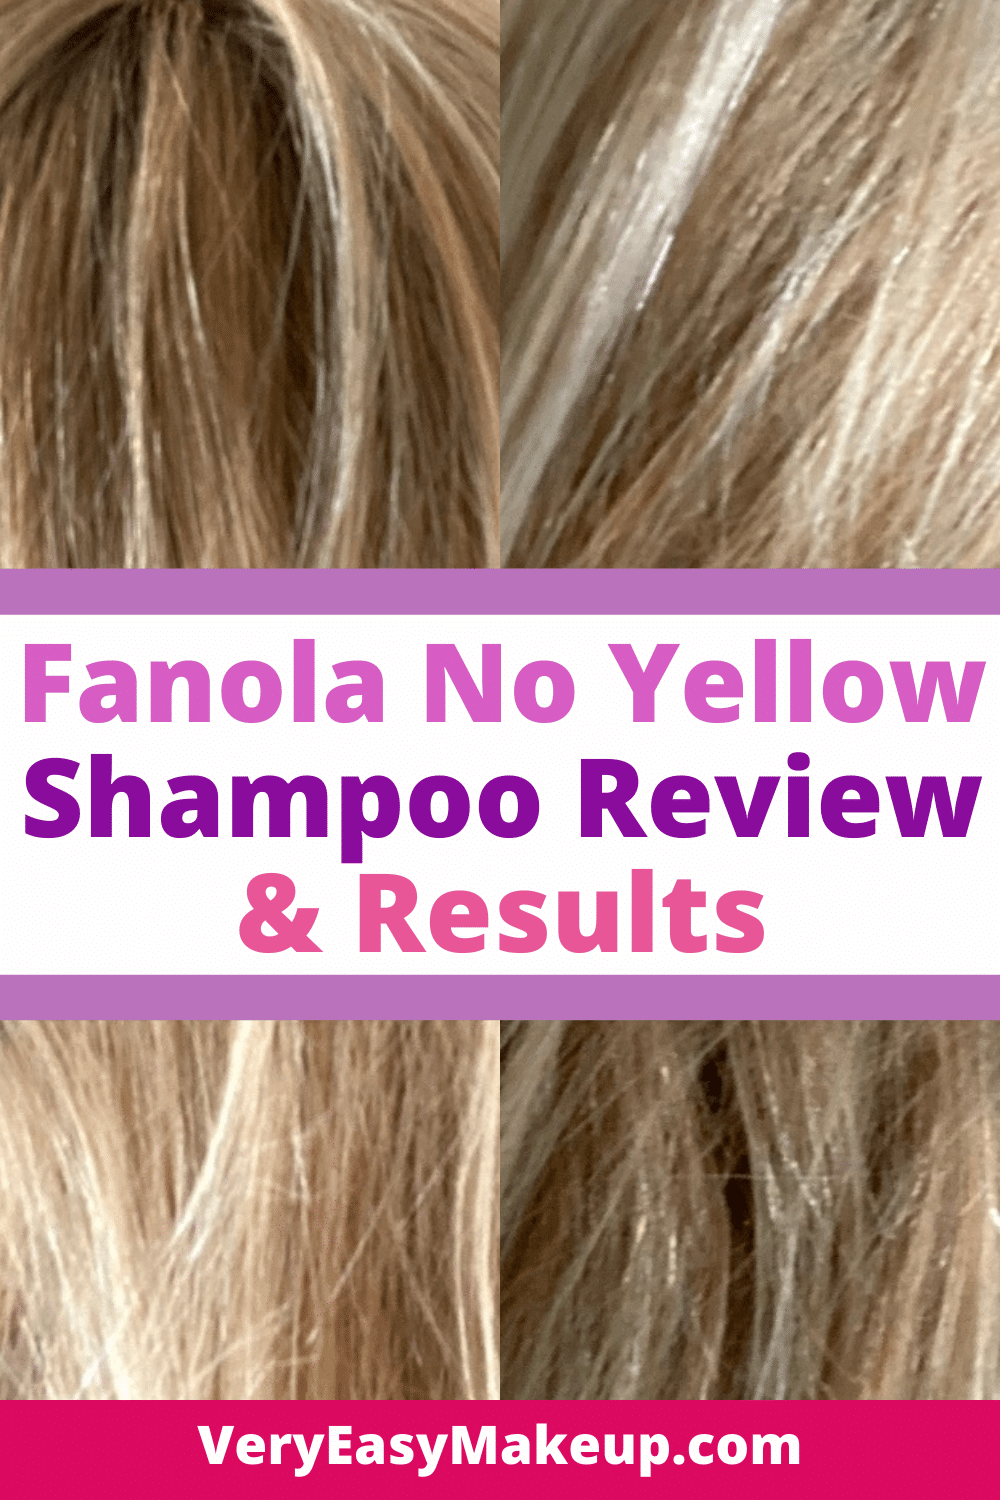 Fanola No Yellow Shampoo Review and Purple Shampoo Results by Very Easy Makeup